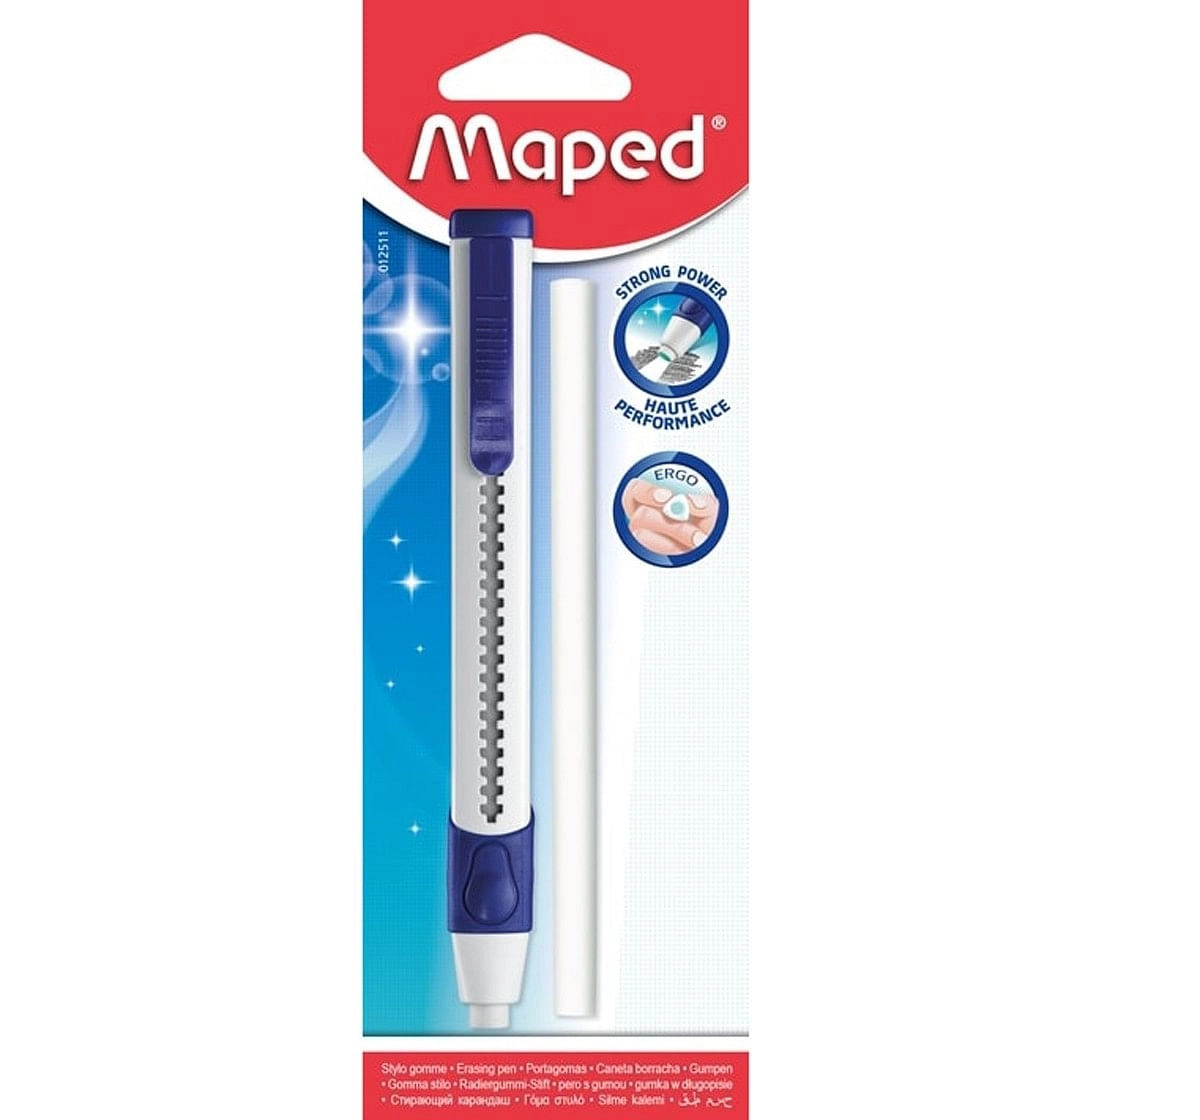 Maped gomme Essentials Soft, couleurs assorties